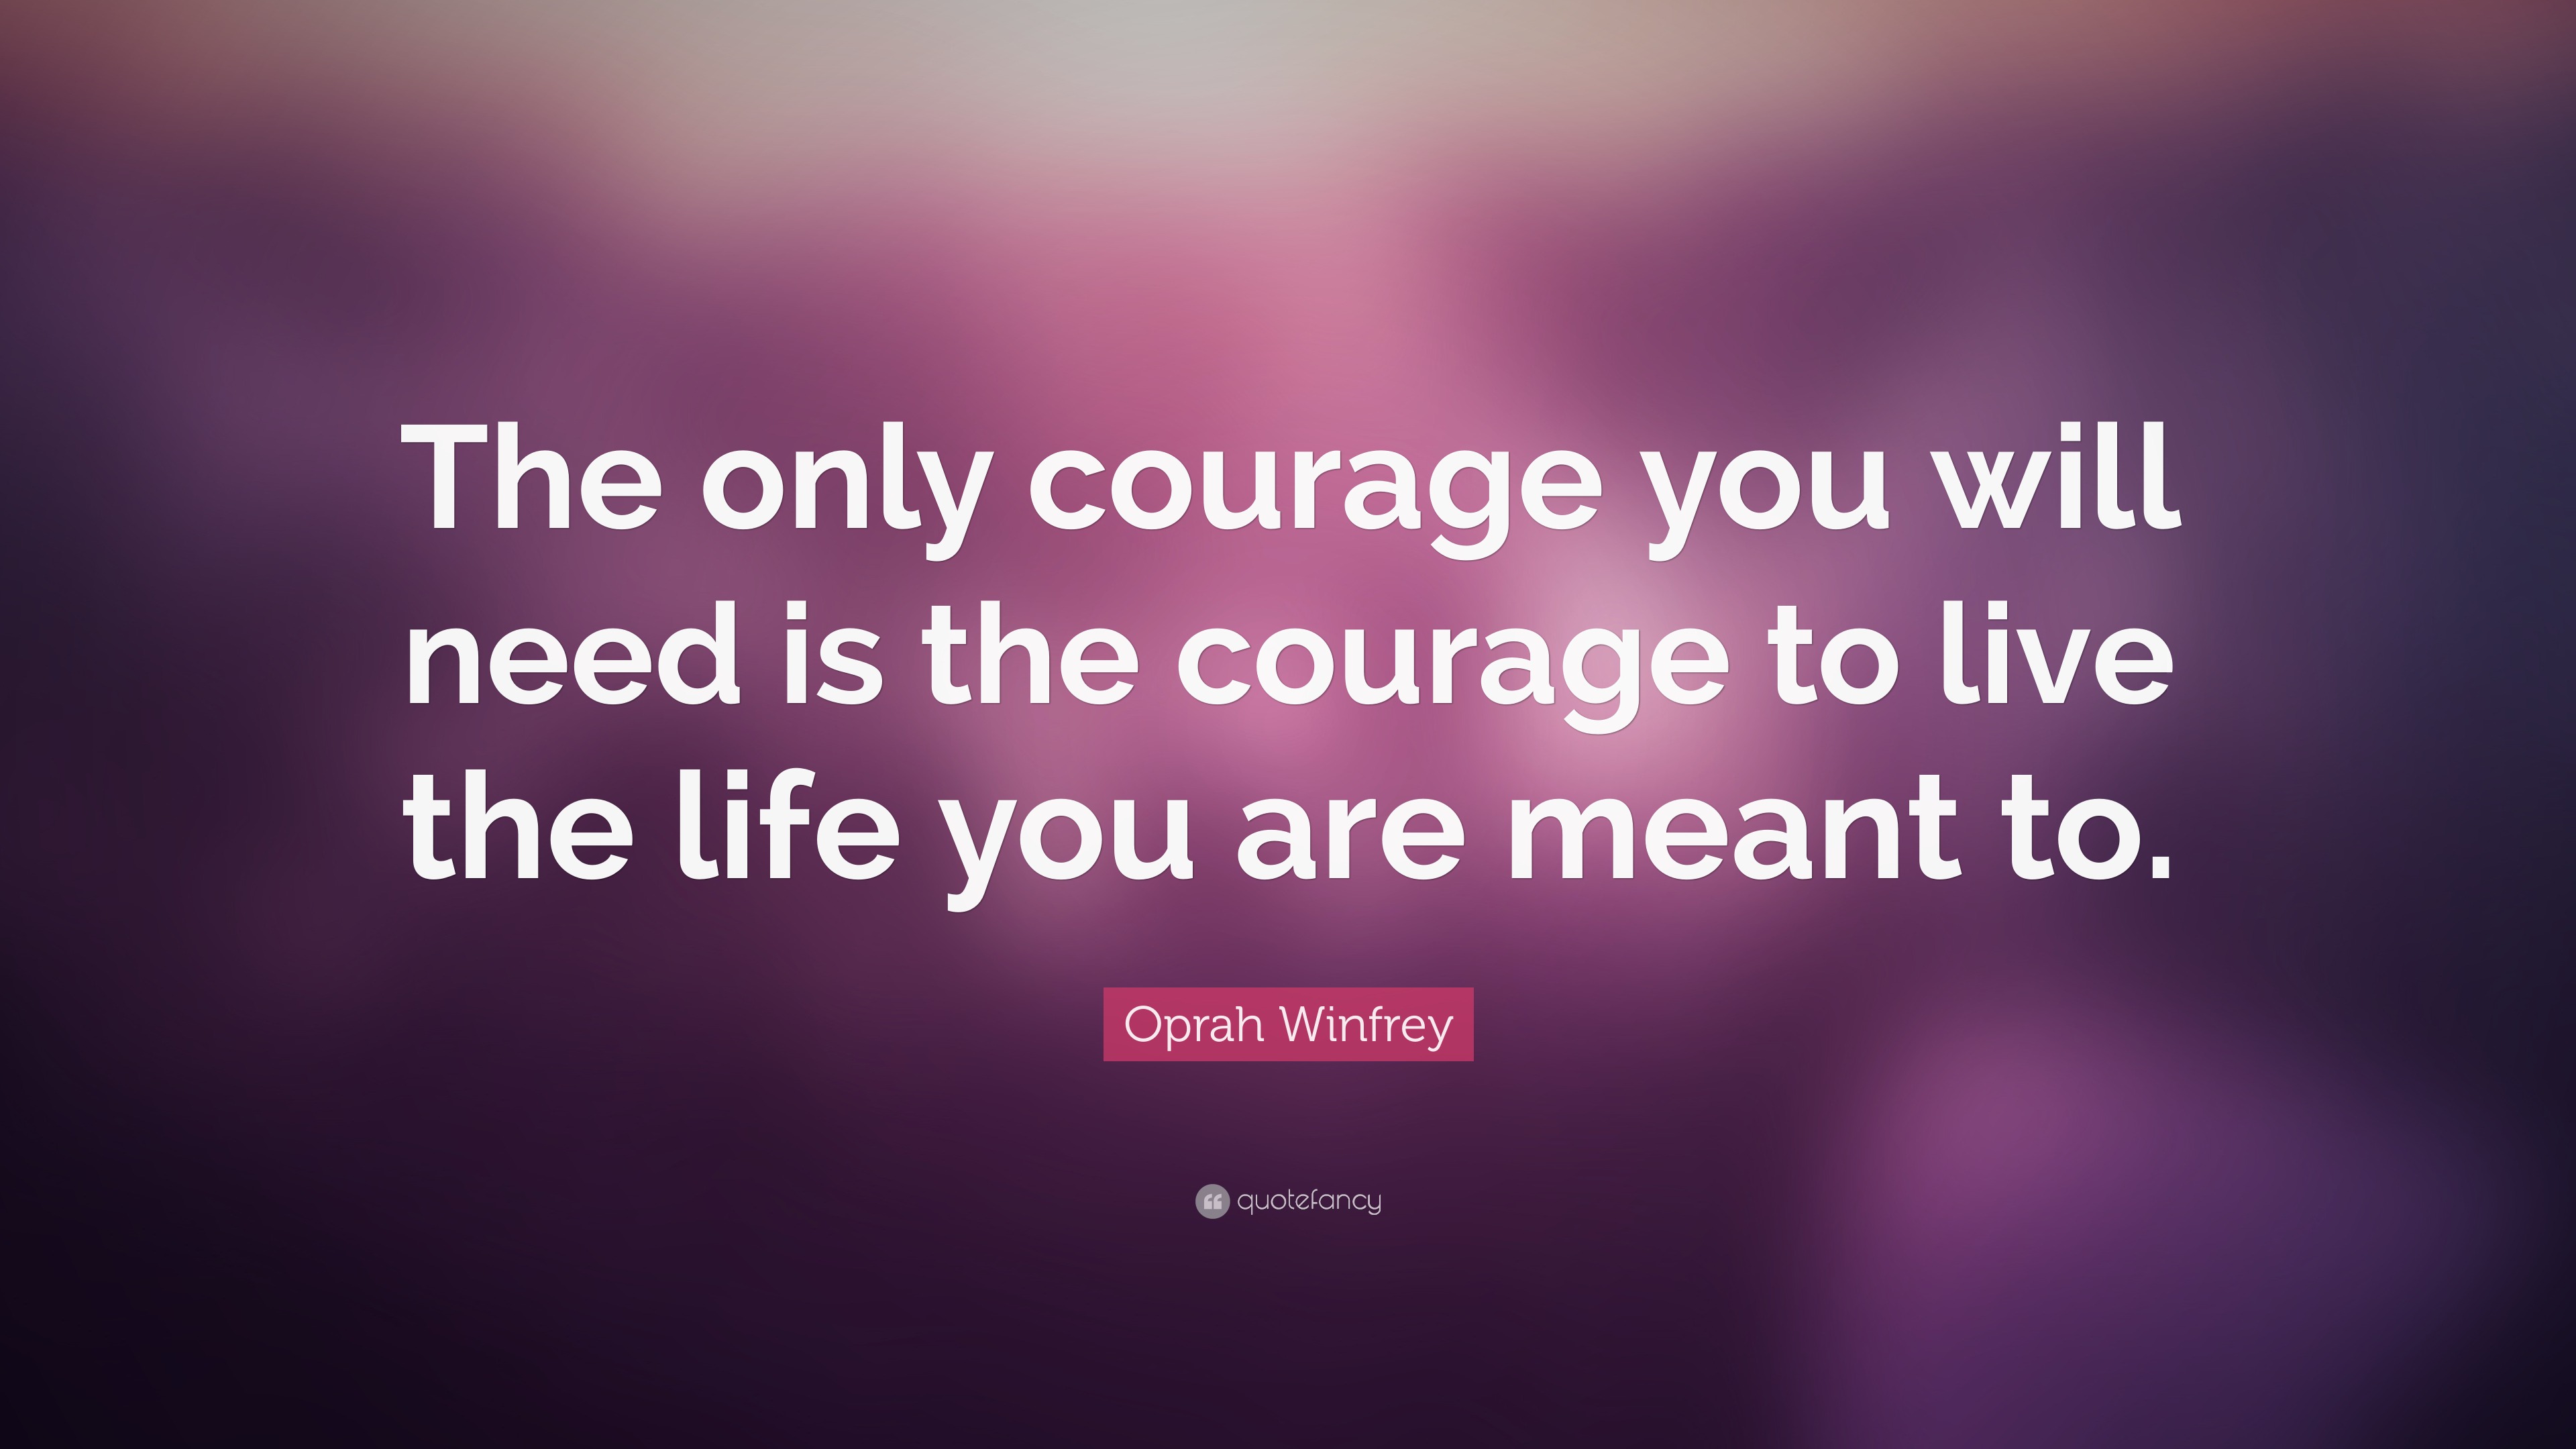 Oprah Winfrey Quote: “The only courage you will need is the courage to ...